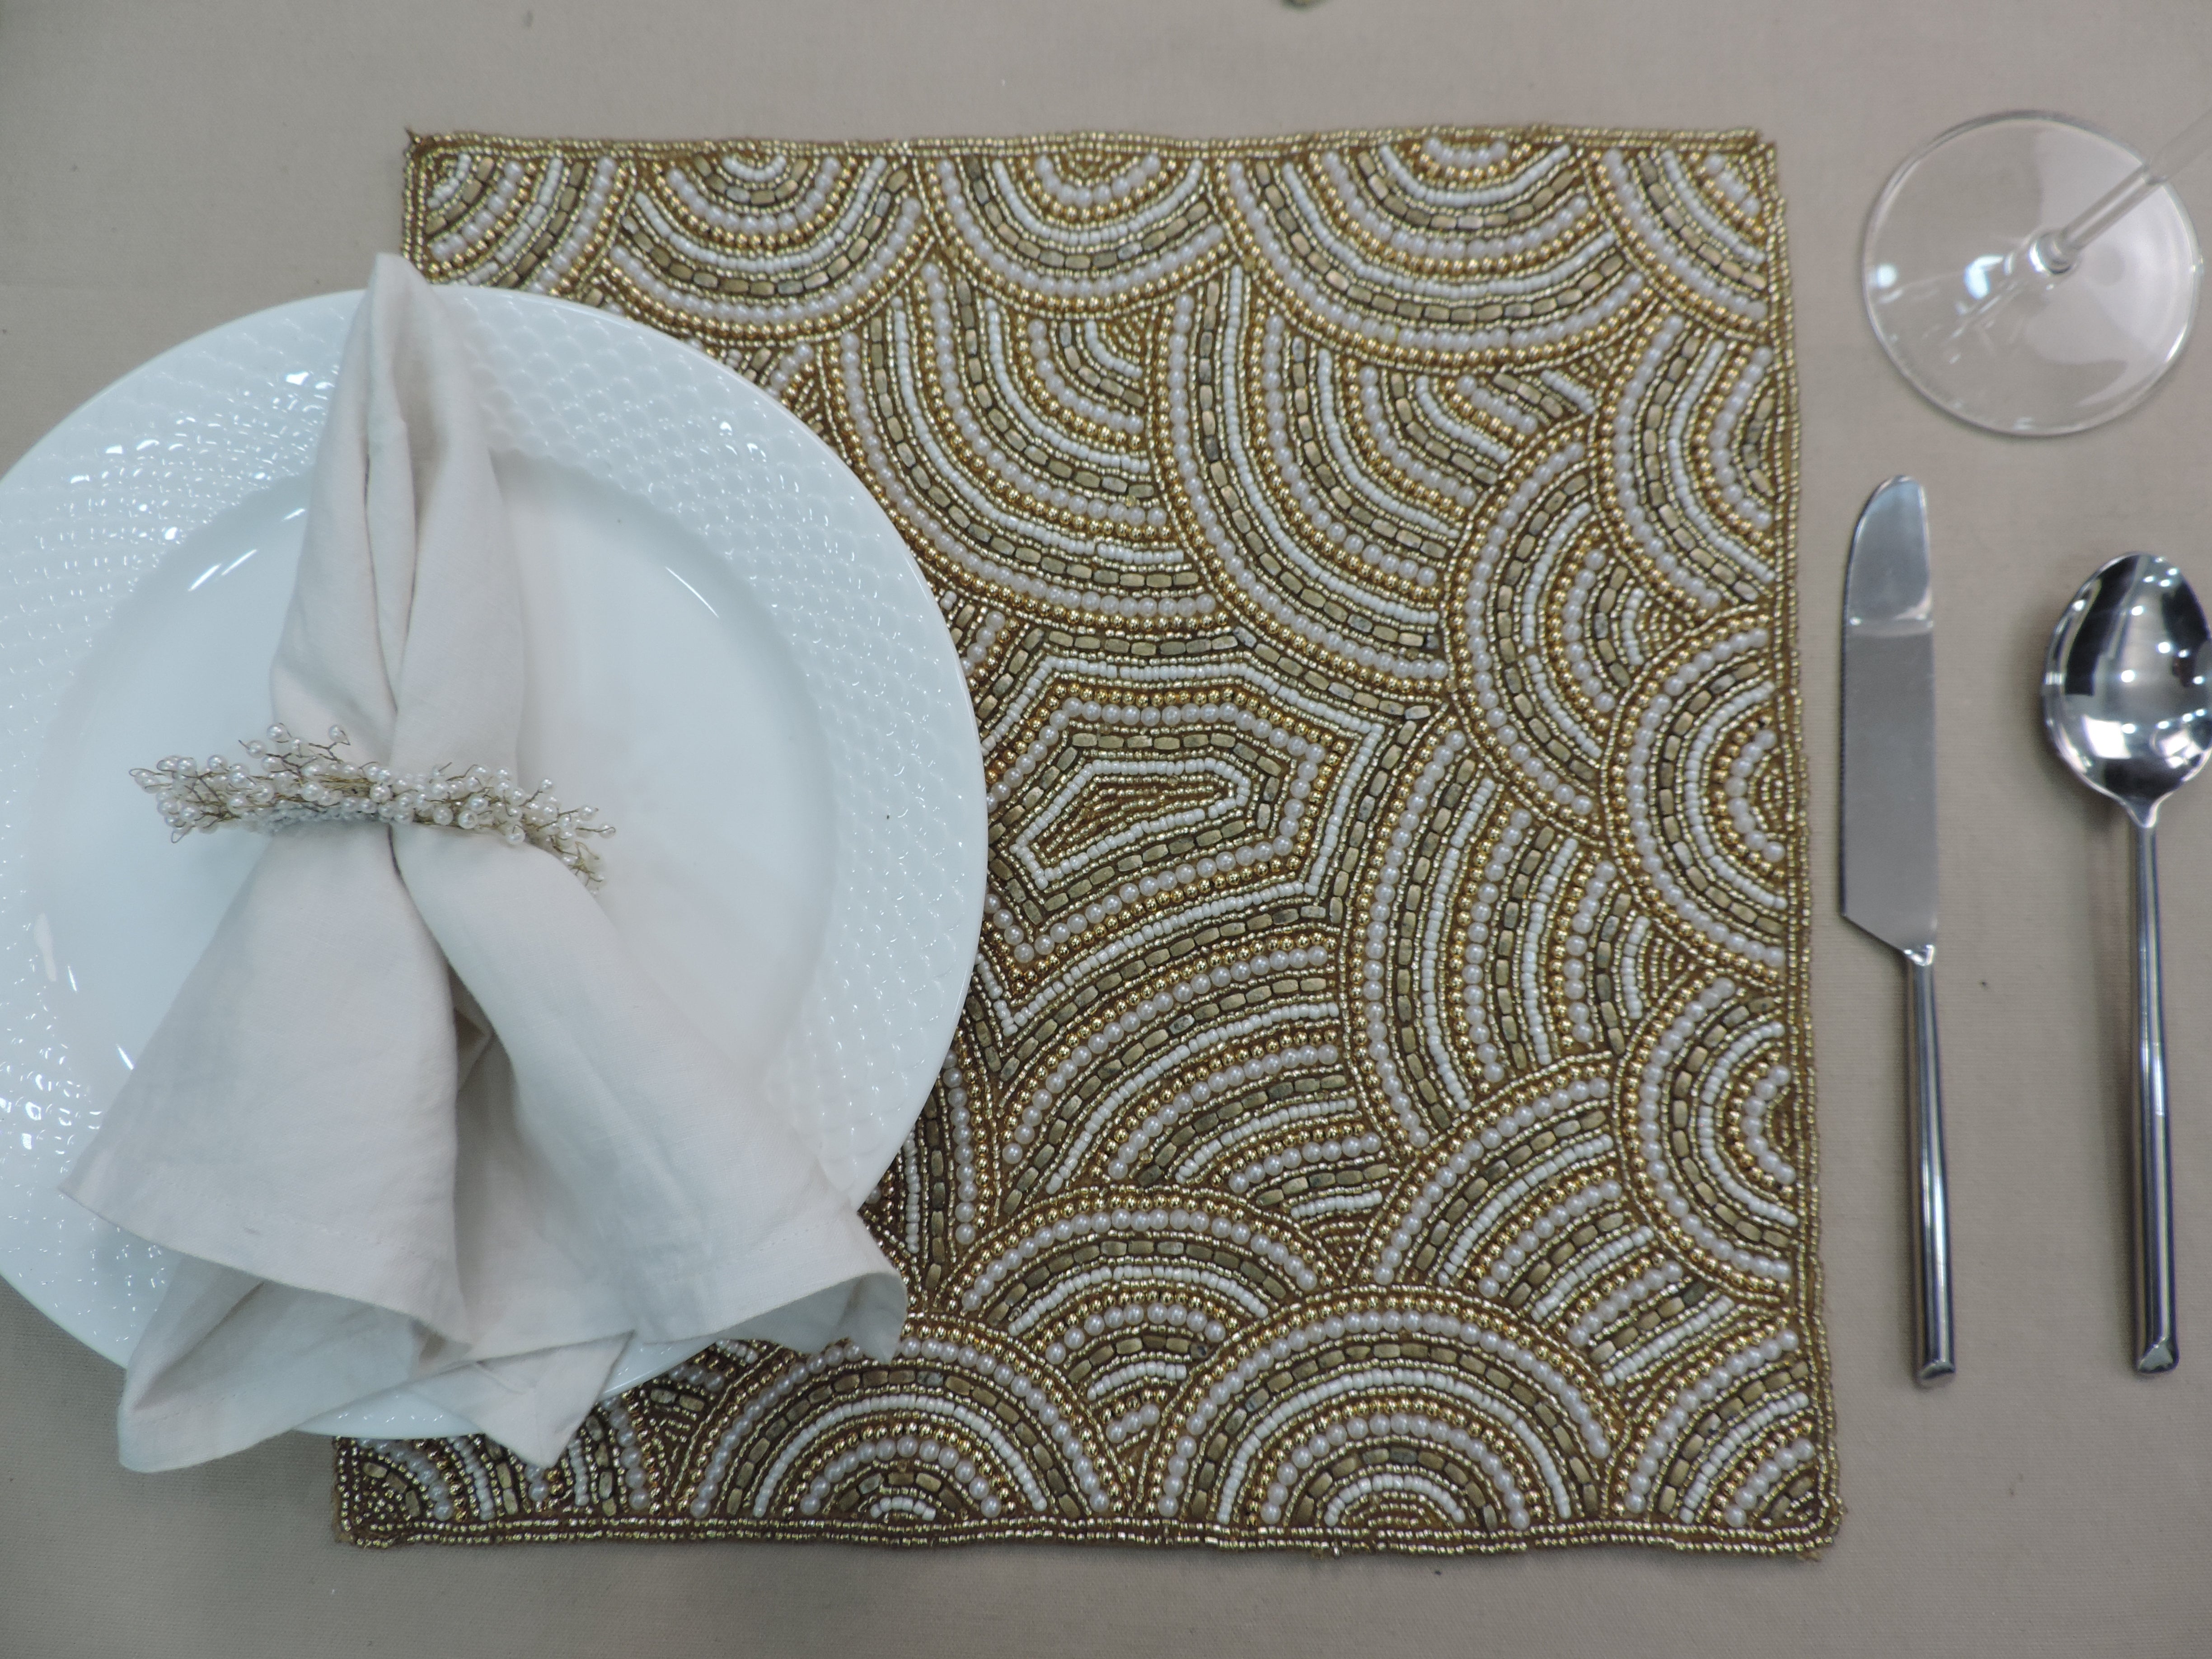 Glass Bead Flower Embroidered Placemats, Chargers / Set of 2 / 14in. Square / Cream & Gold